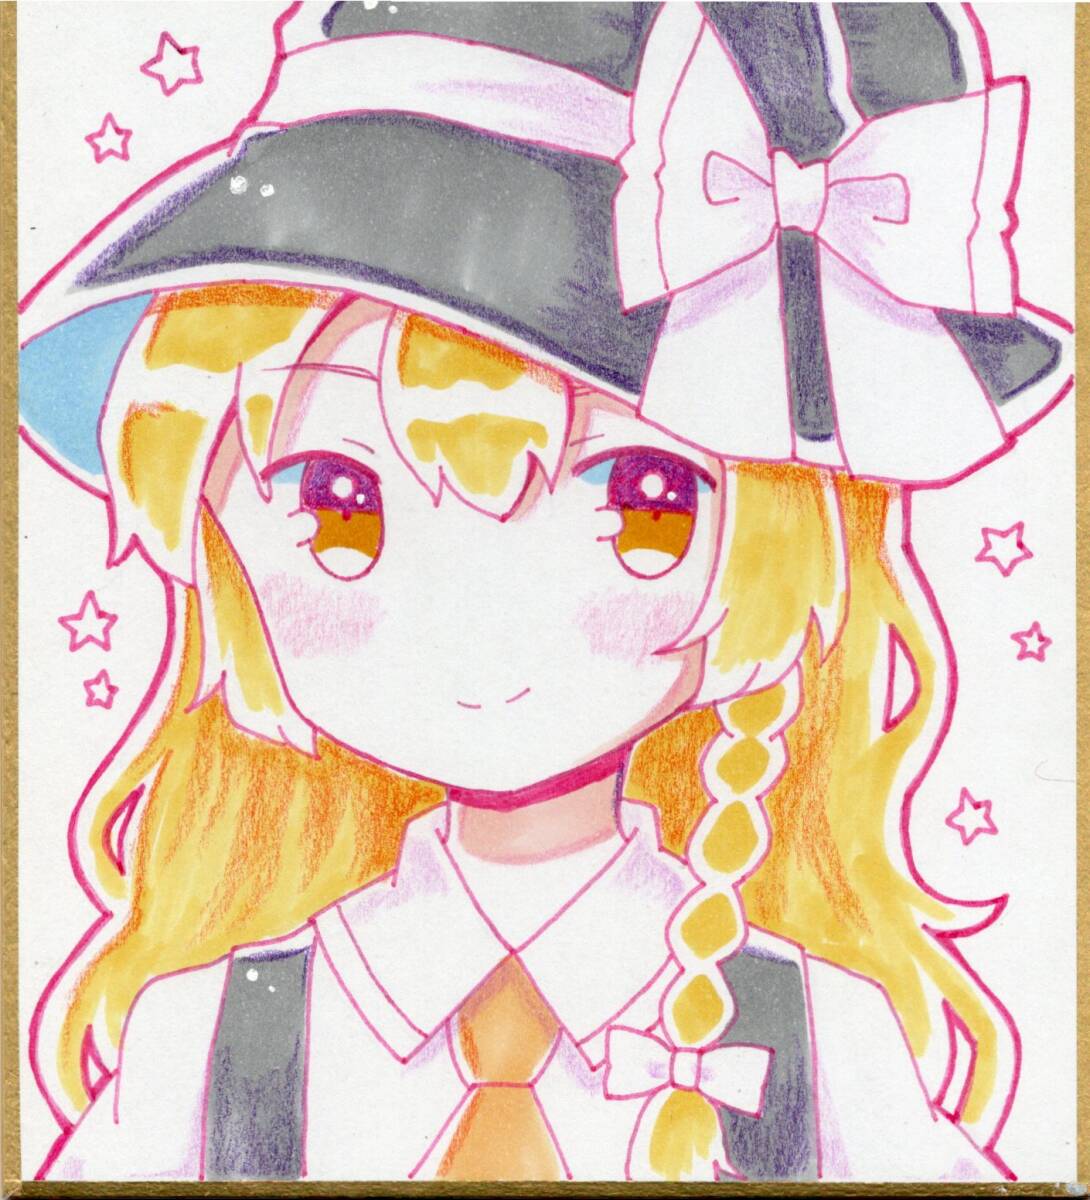 Hand-drawn illustration small colored paper Touhou Project Marisa Kirisame, comics, anime goods, hand drawn illustration